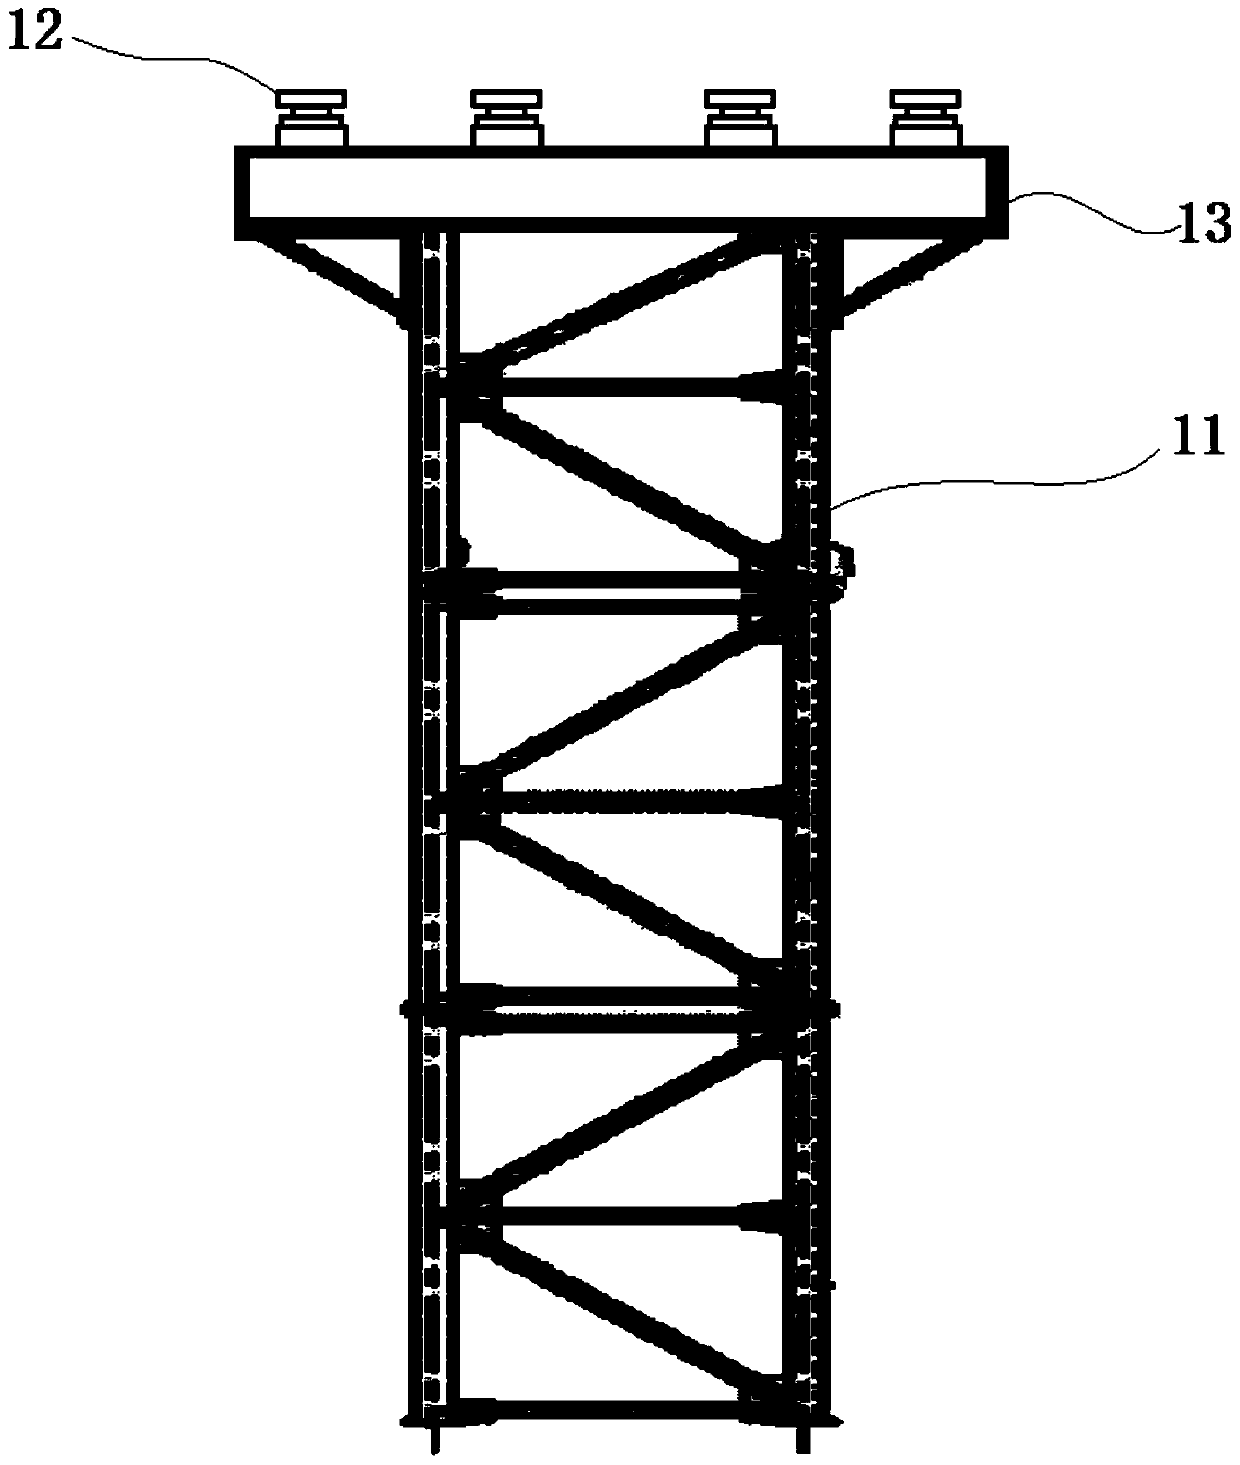 Bridge temporary support and construction method